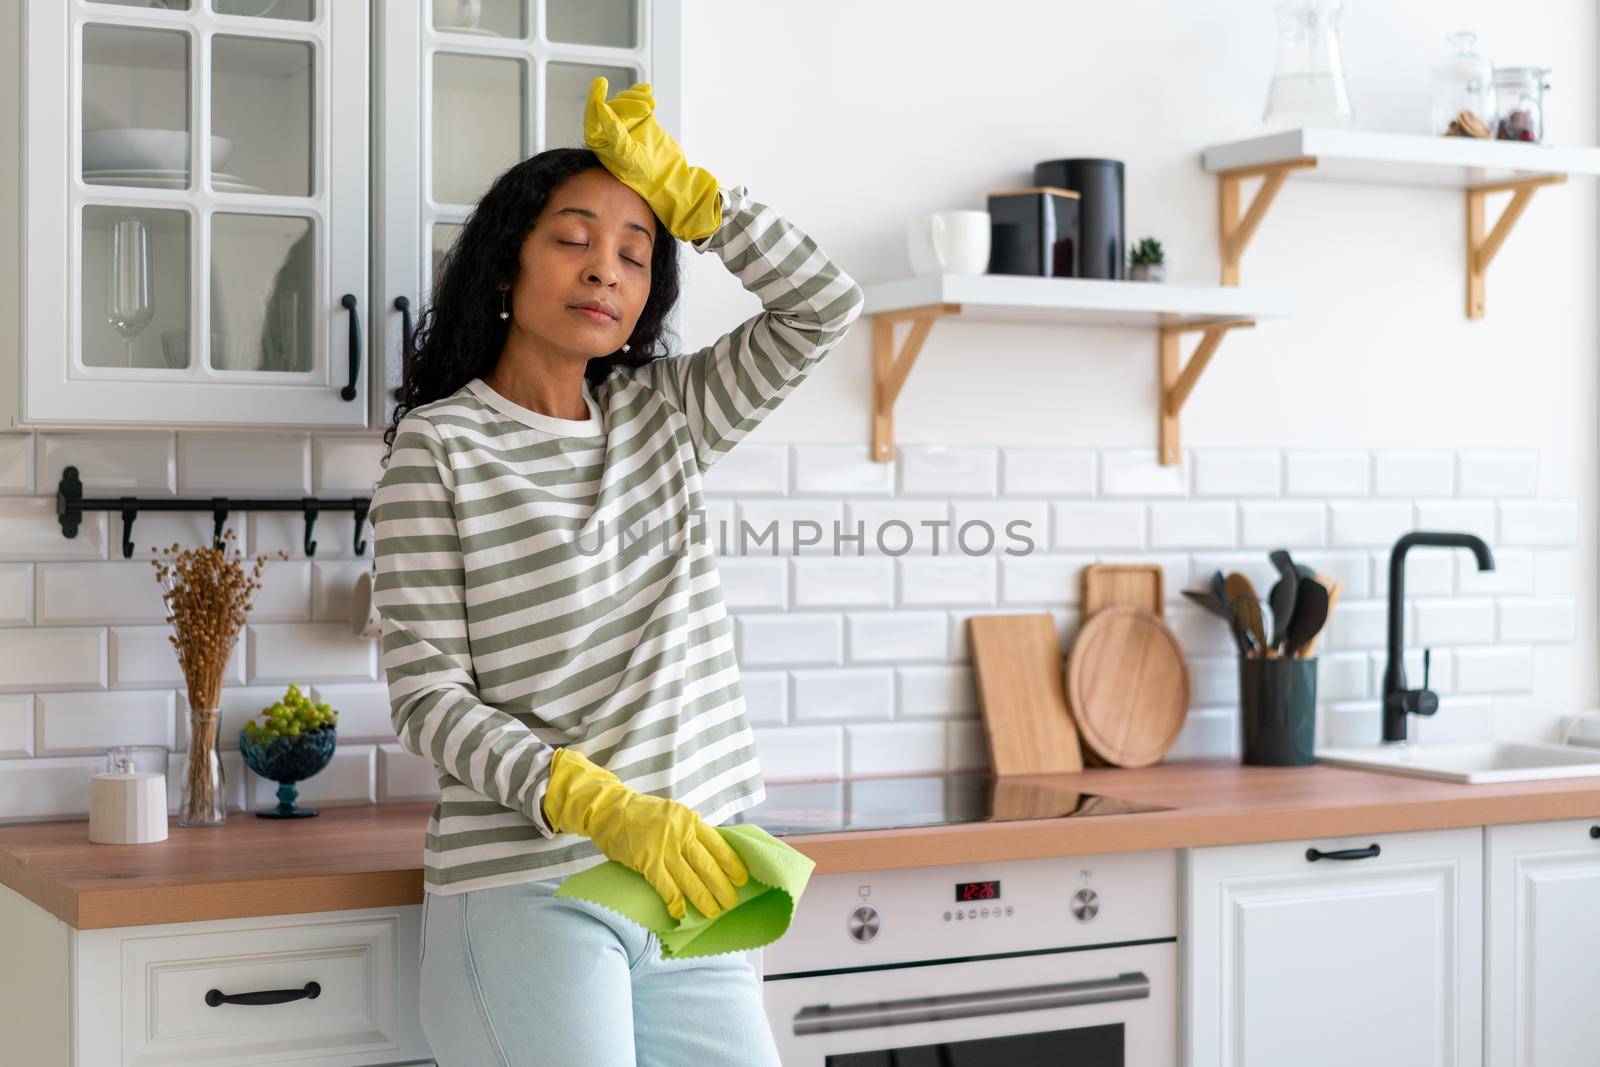 African-american woman wiping sweat from forehead after cleaning kitchen unit. Having rest after dust handling in rubber gloves with washcloth. Concept of tired housekeeper. Finishing cleanup